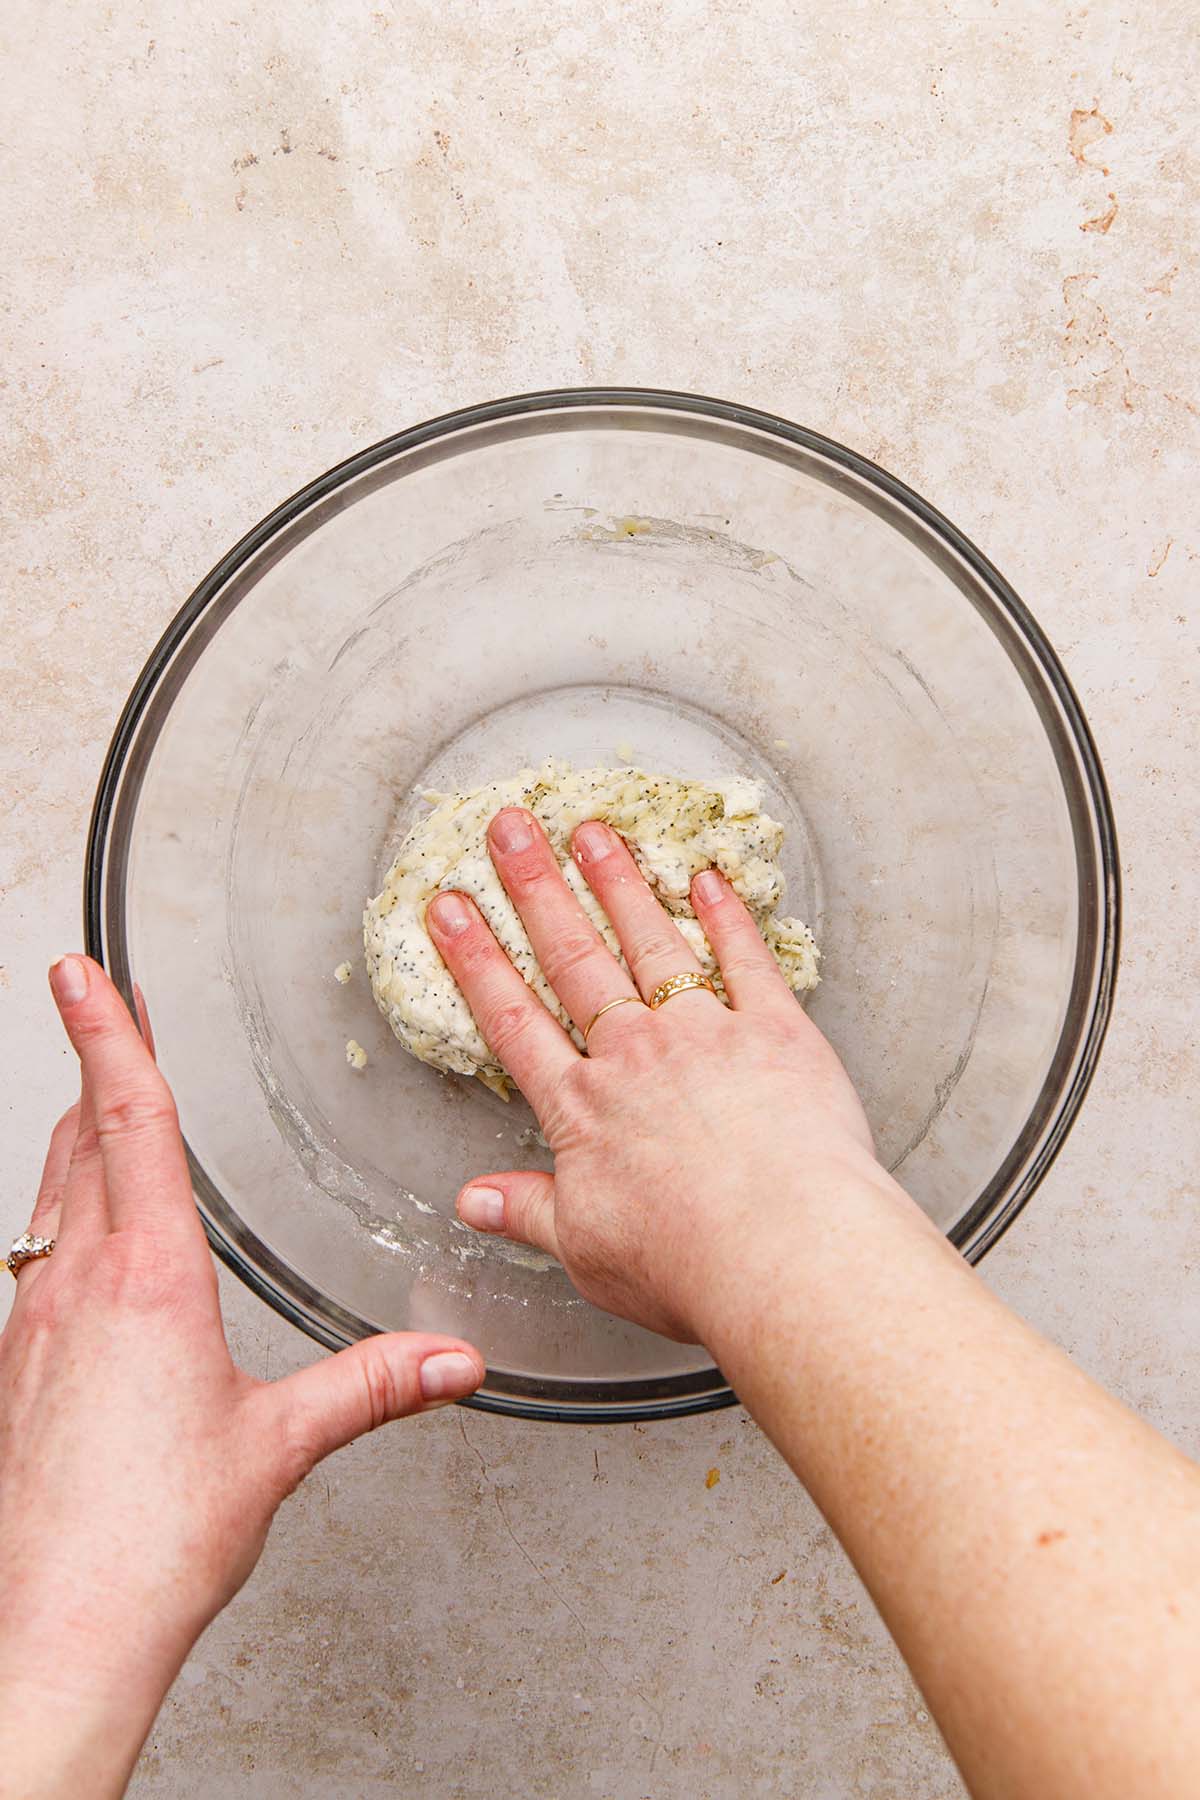 Hands lightly kneading dough in a glass bowl.